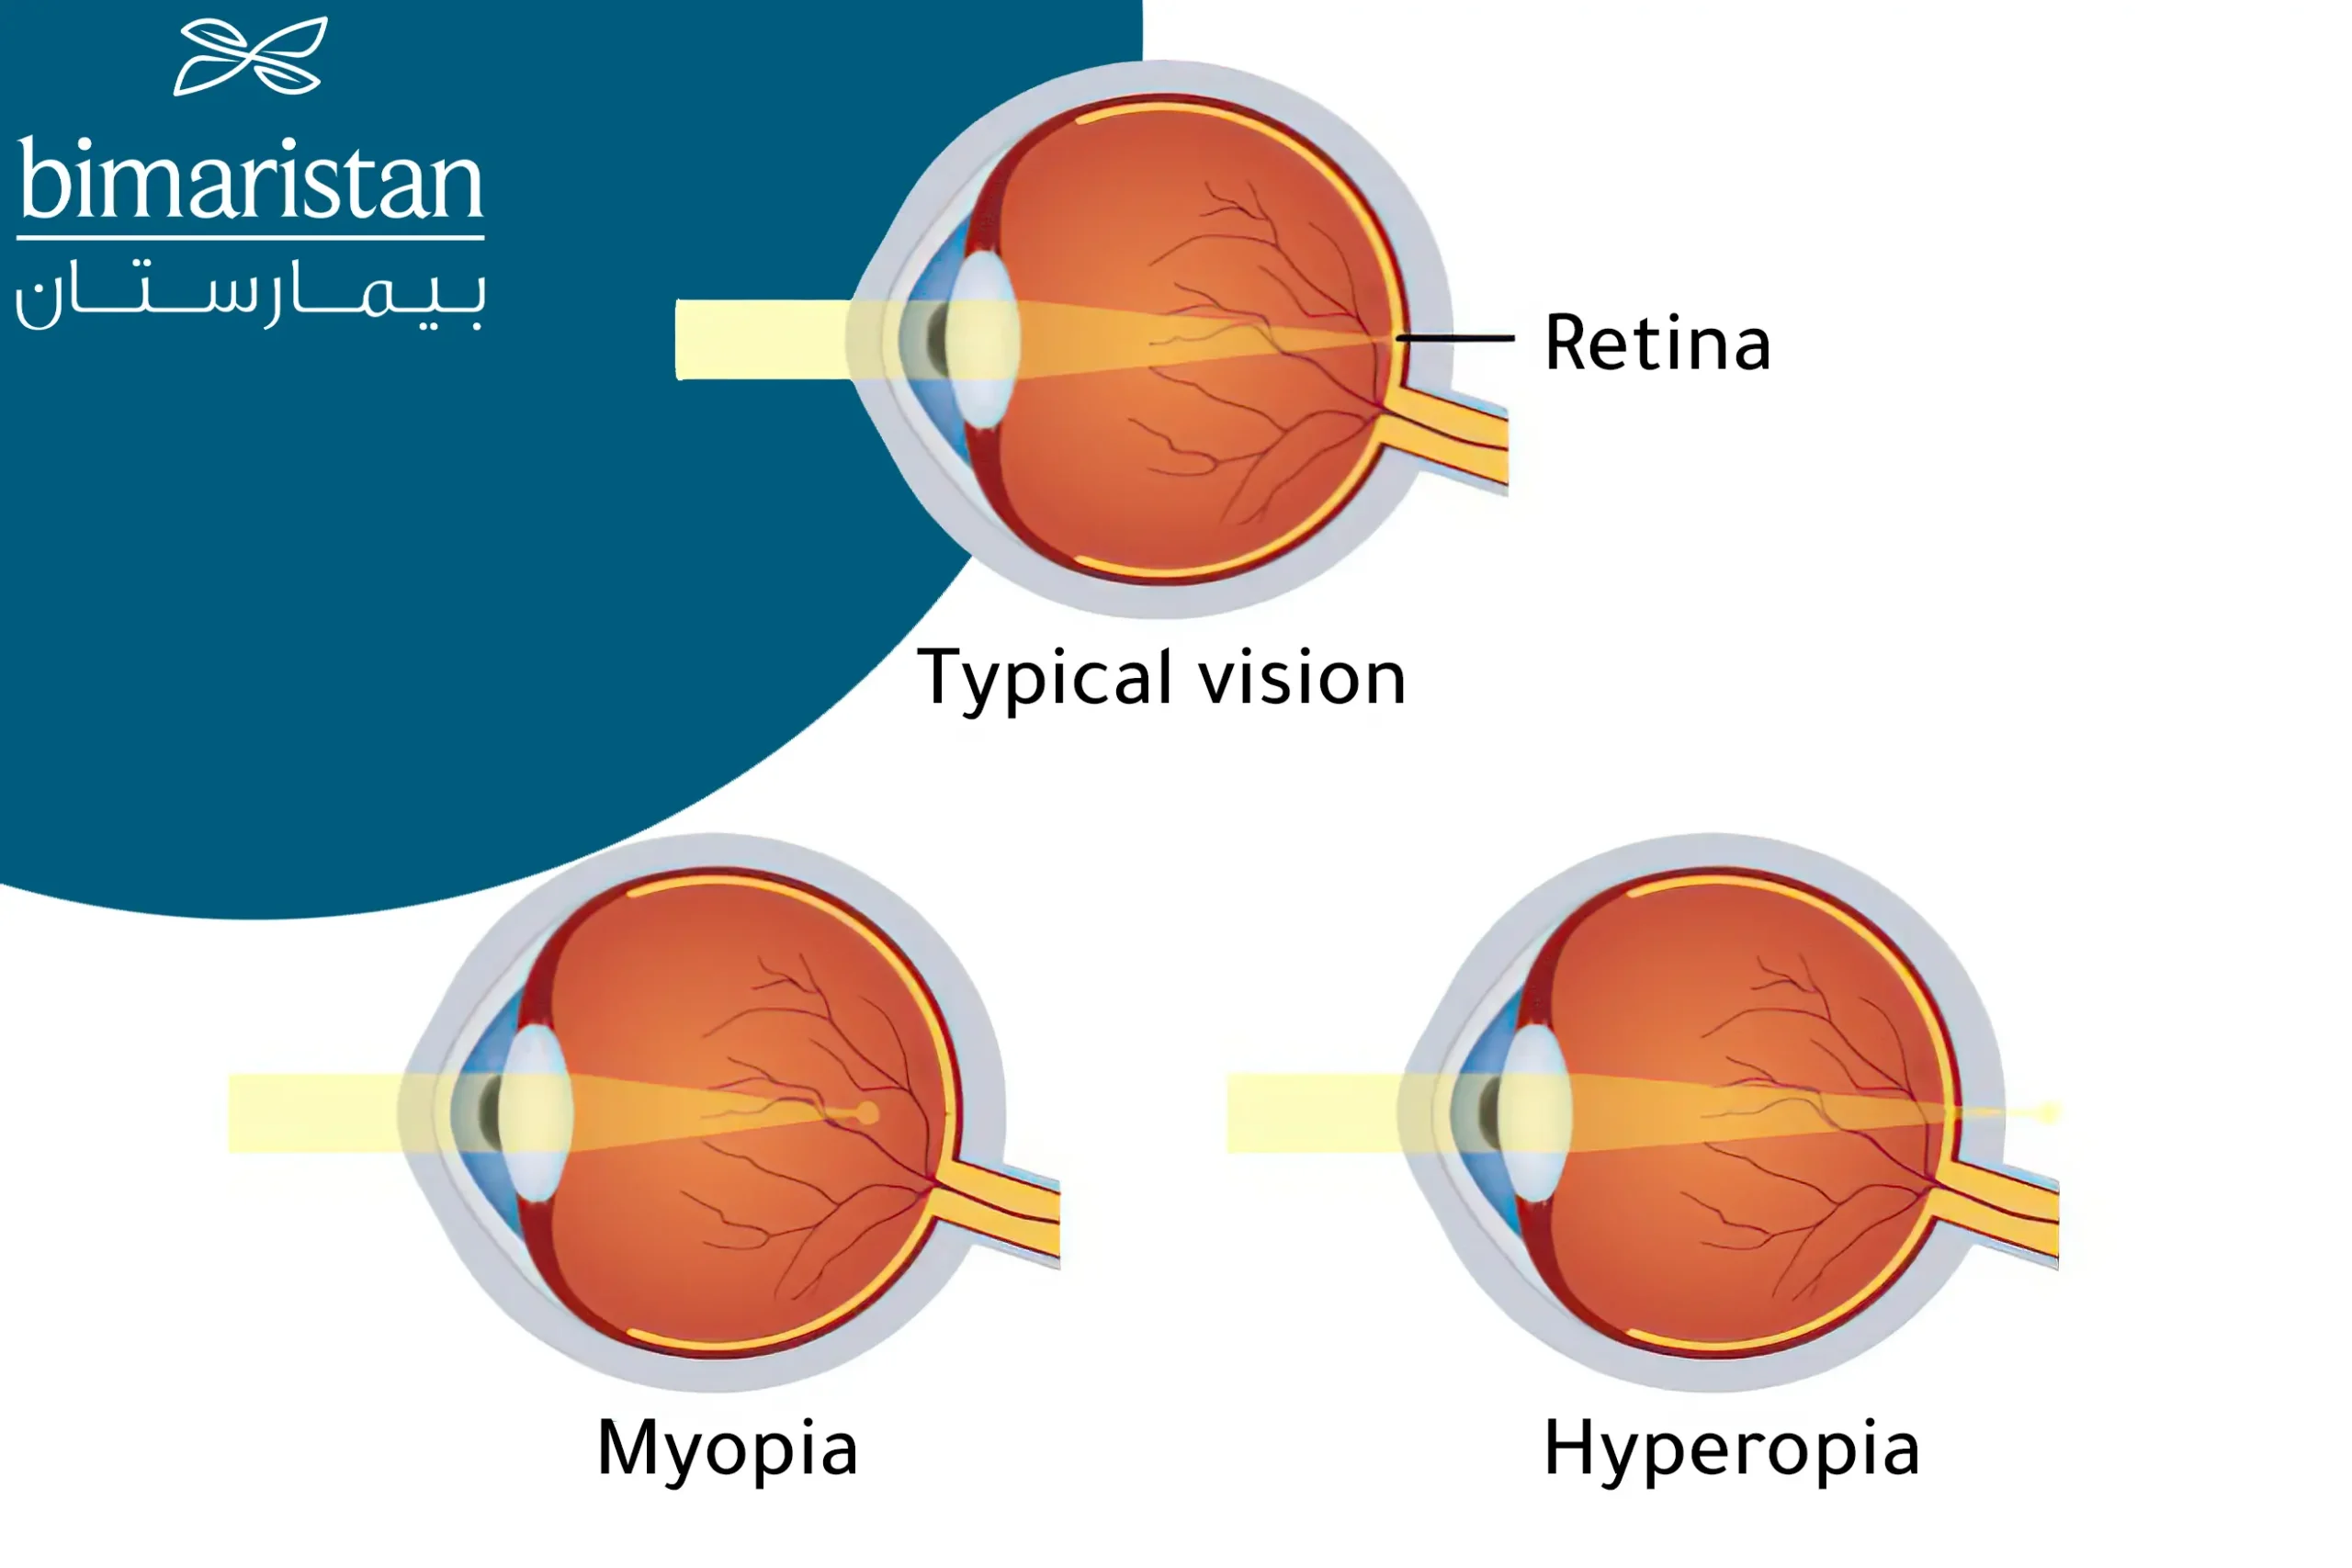 A Picture Showing Vision Defects That Can Be Corrected Through Lasik Surgery In Turkey.